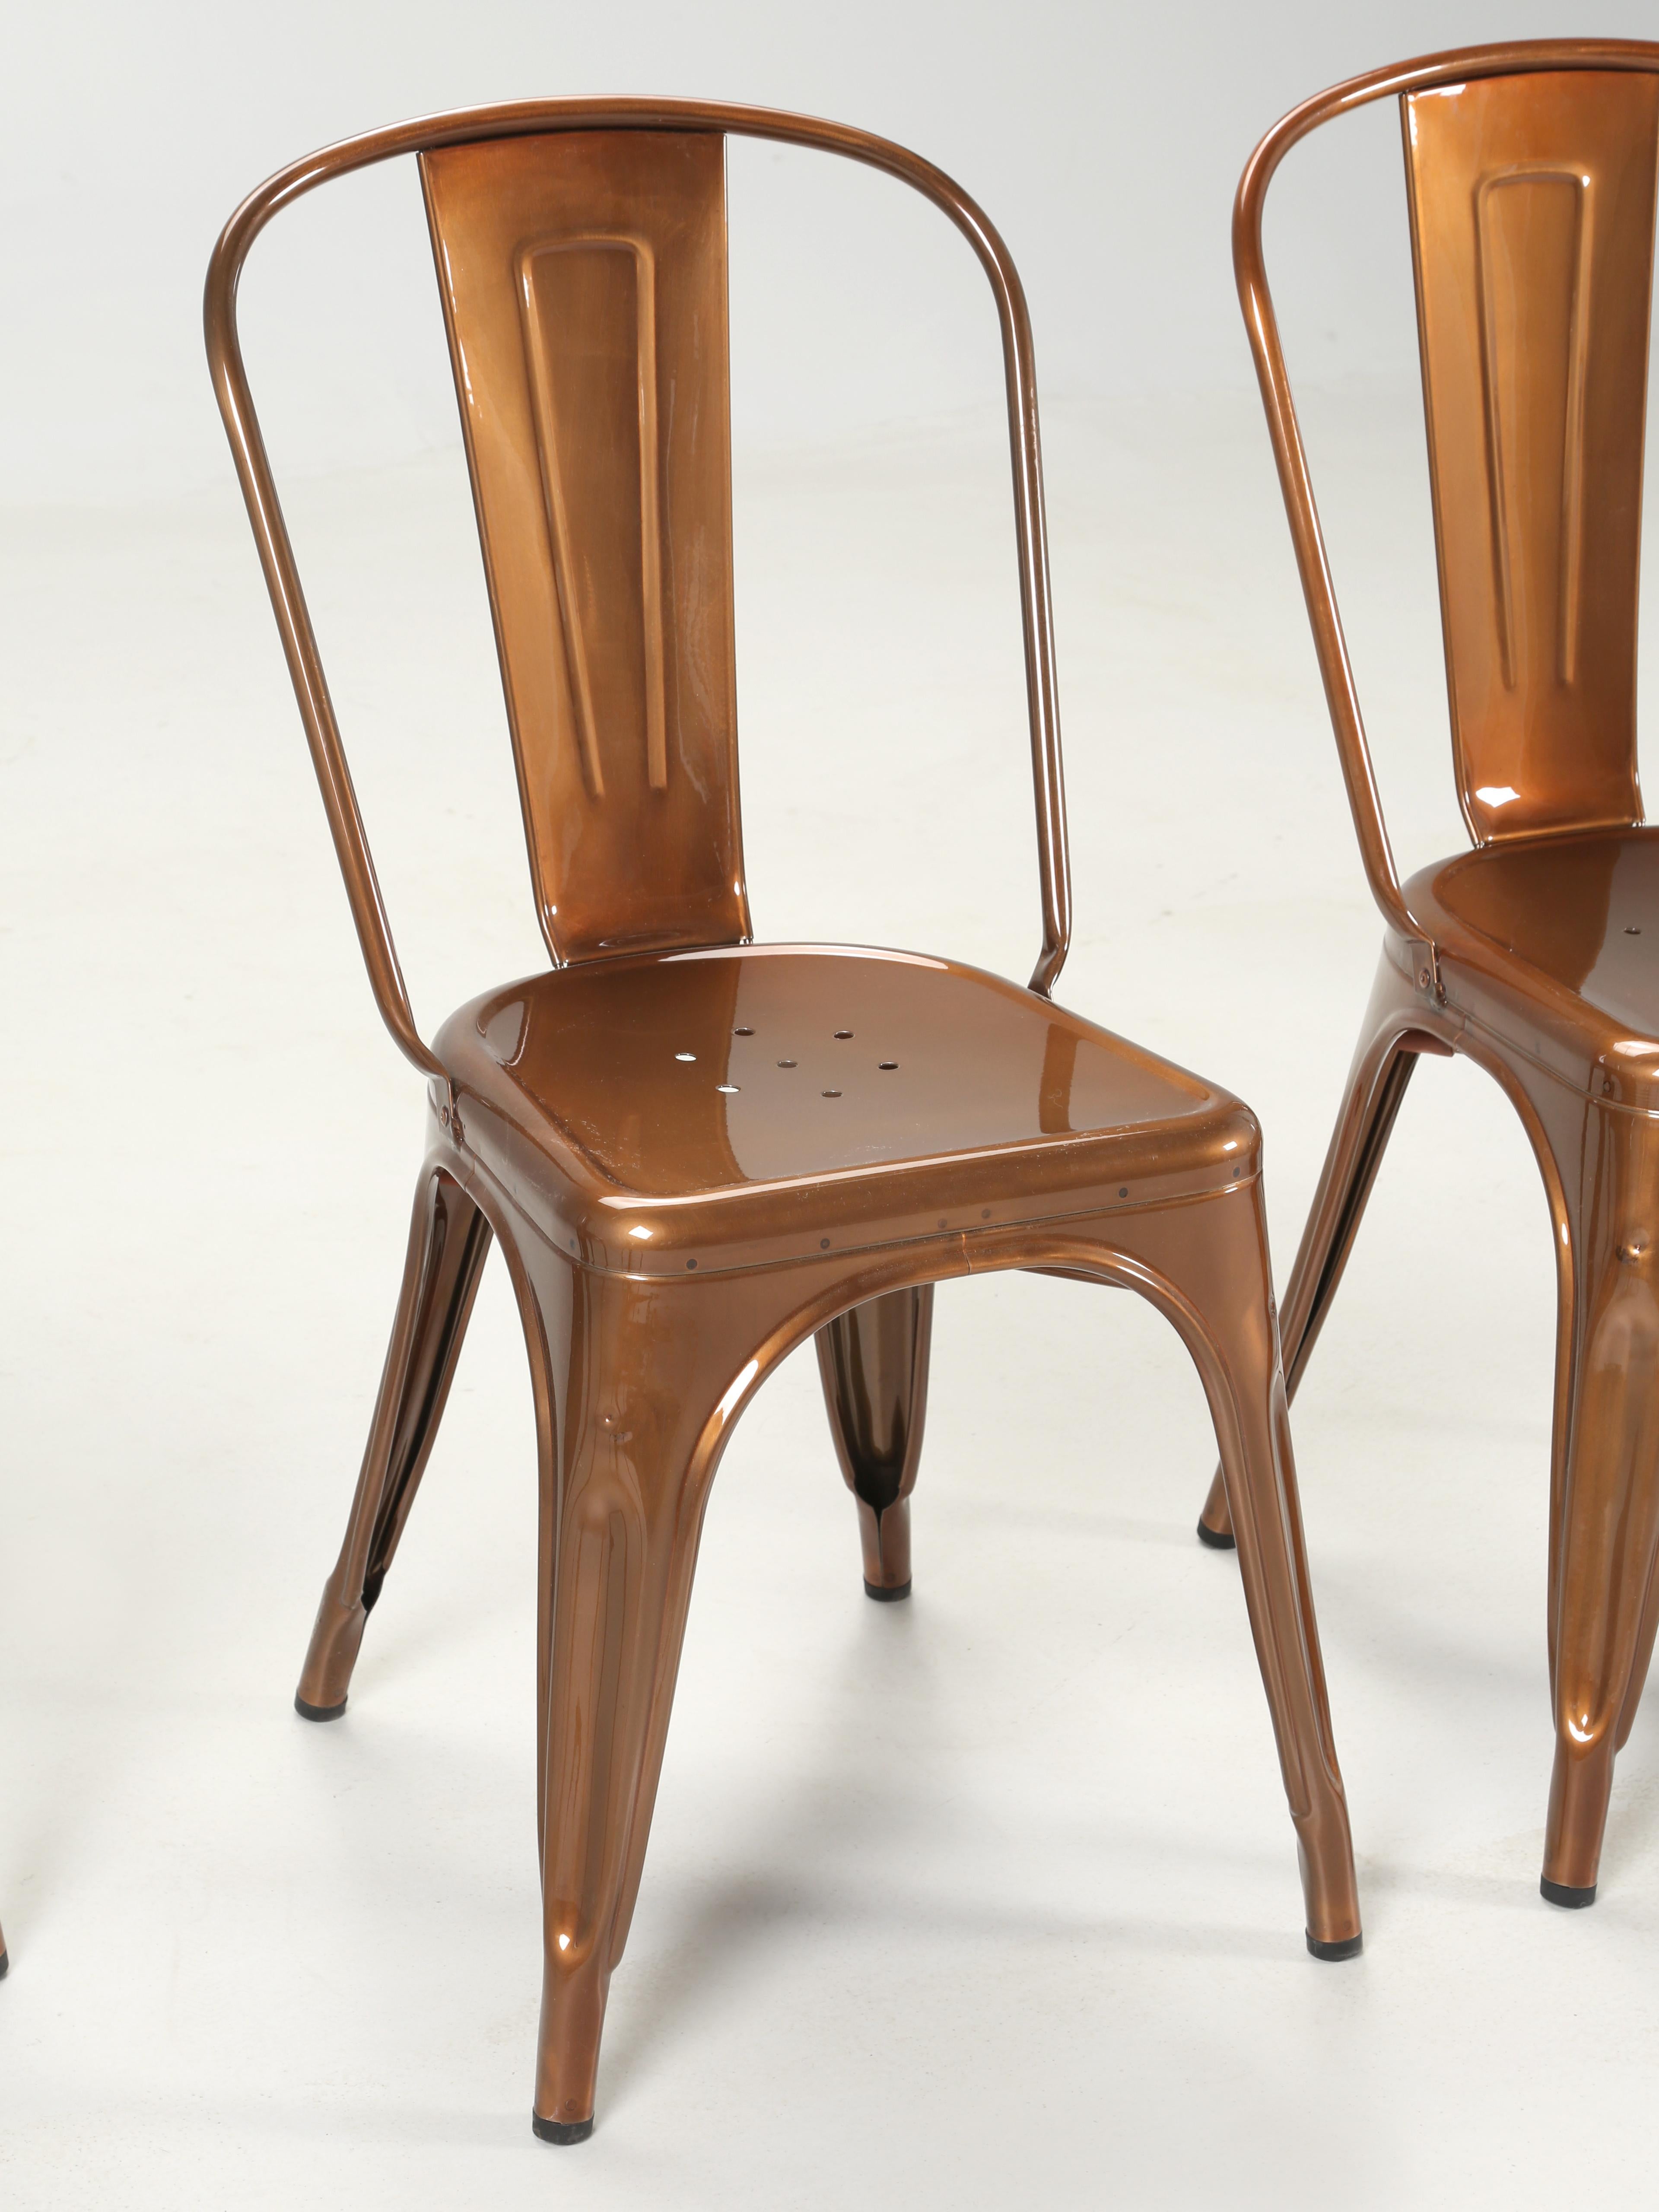 Industrial Authentic French Tolix Steel Stacking Chairs, Showroom Samples 100's Available